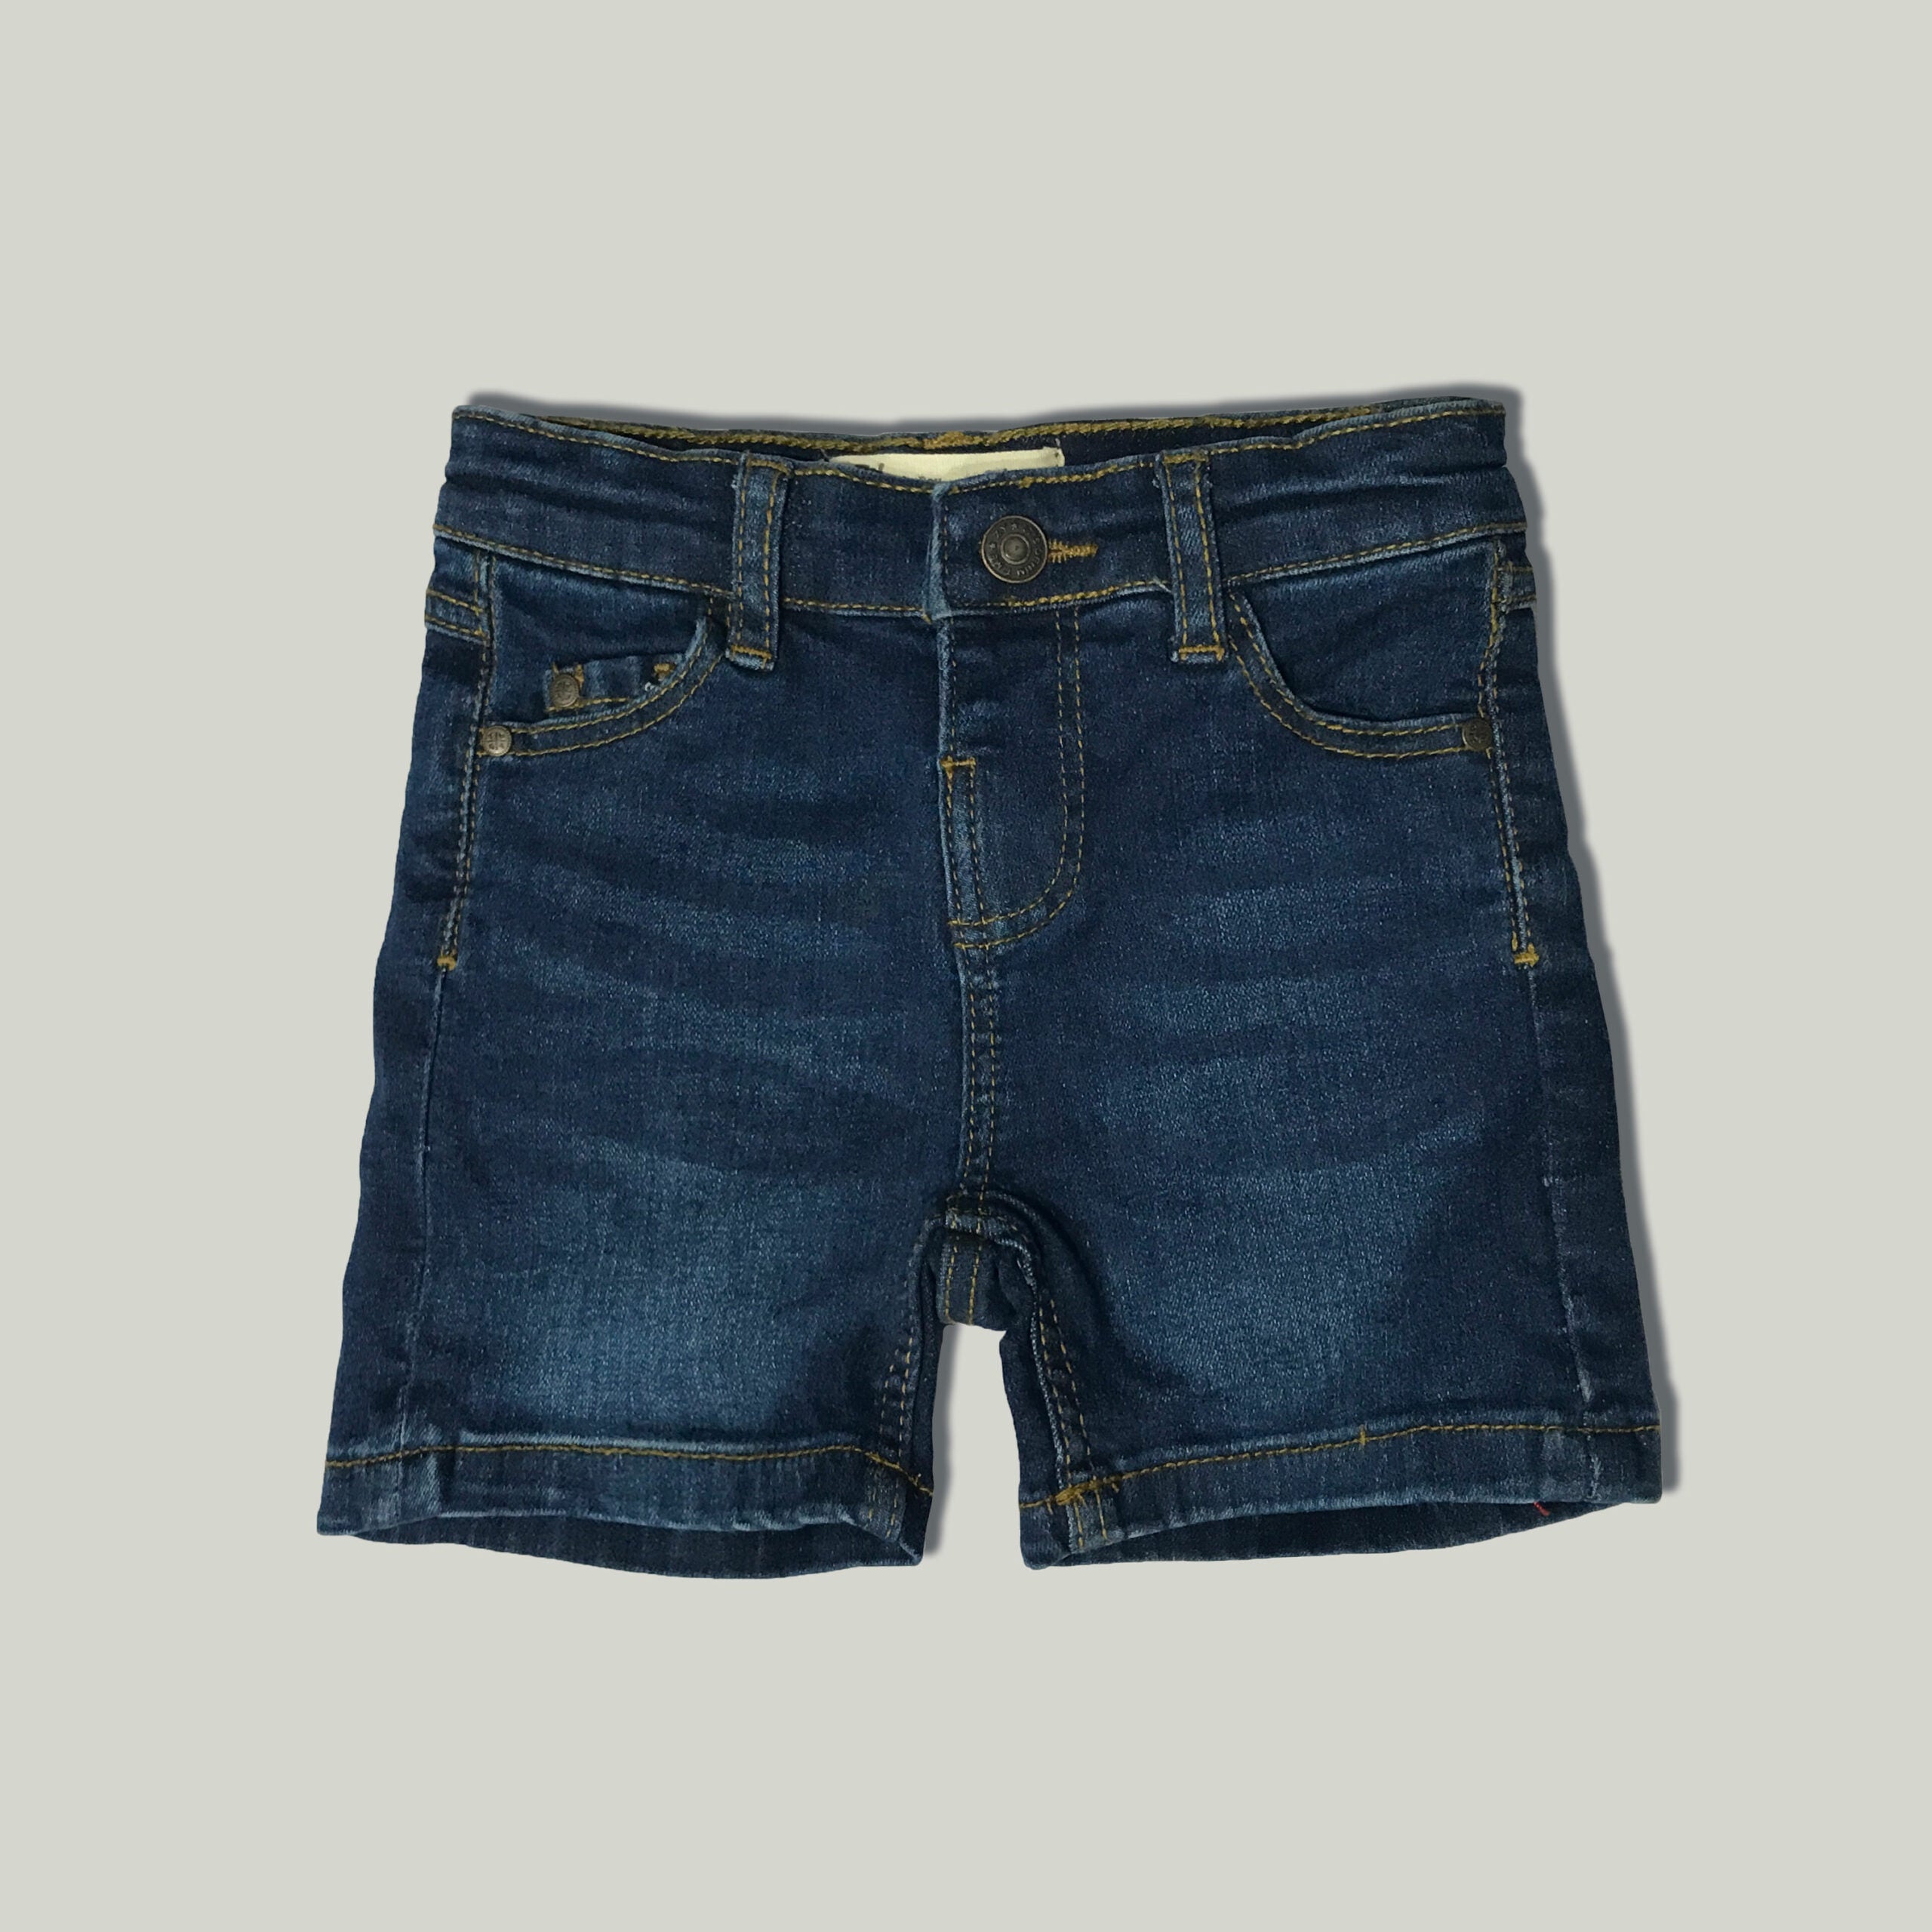 Toddlers Dark Blue Jeans shorts